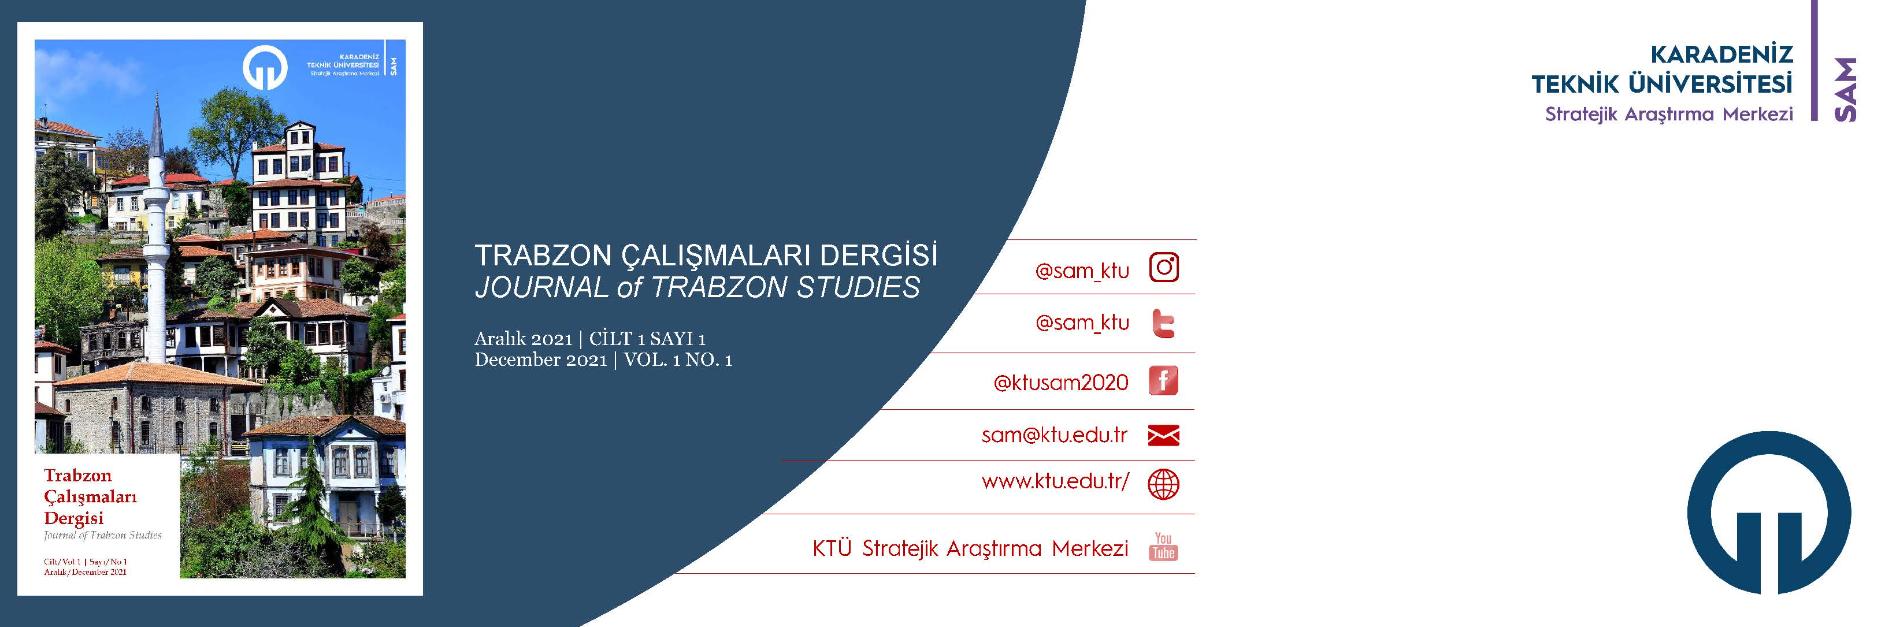 The first issue of the Journal of Trabzon Studies is online now!